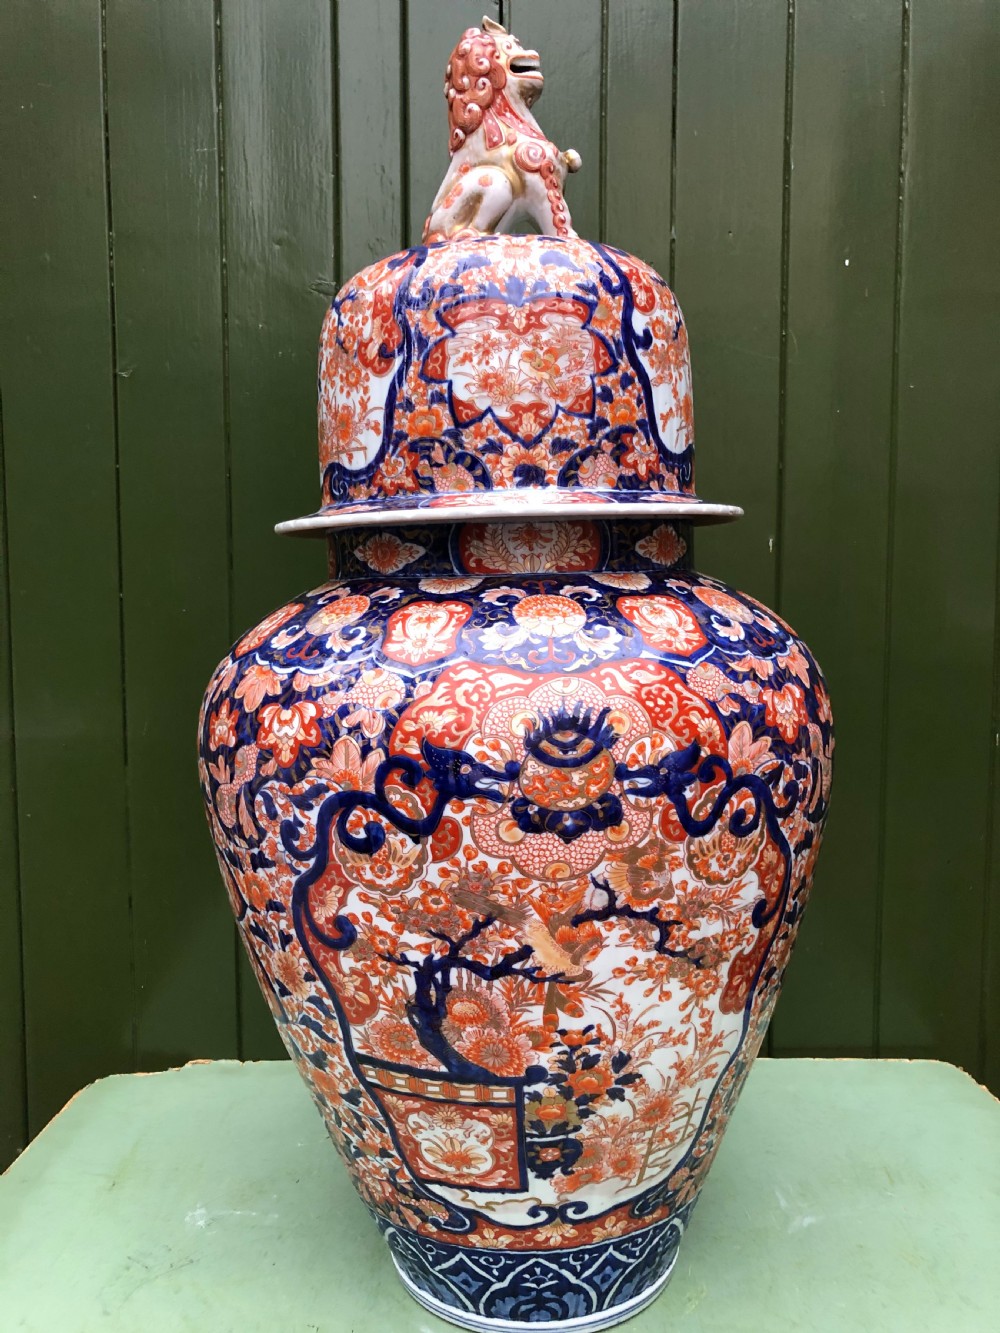 a magnificent largescale c19th japanese meiji period porcelain vase and cover decorated in the imari palette